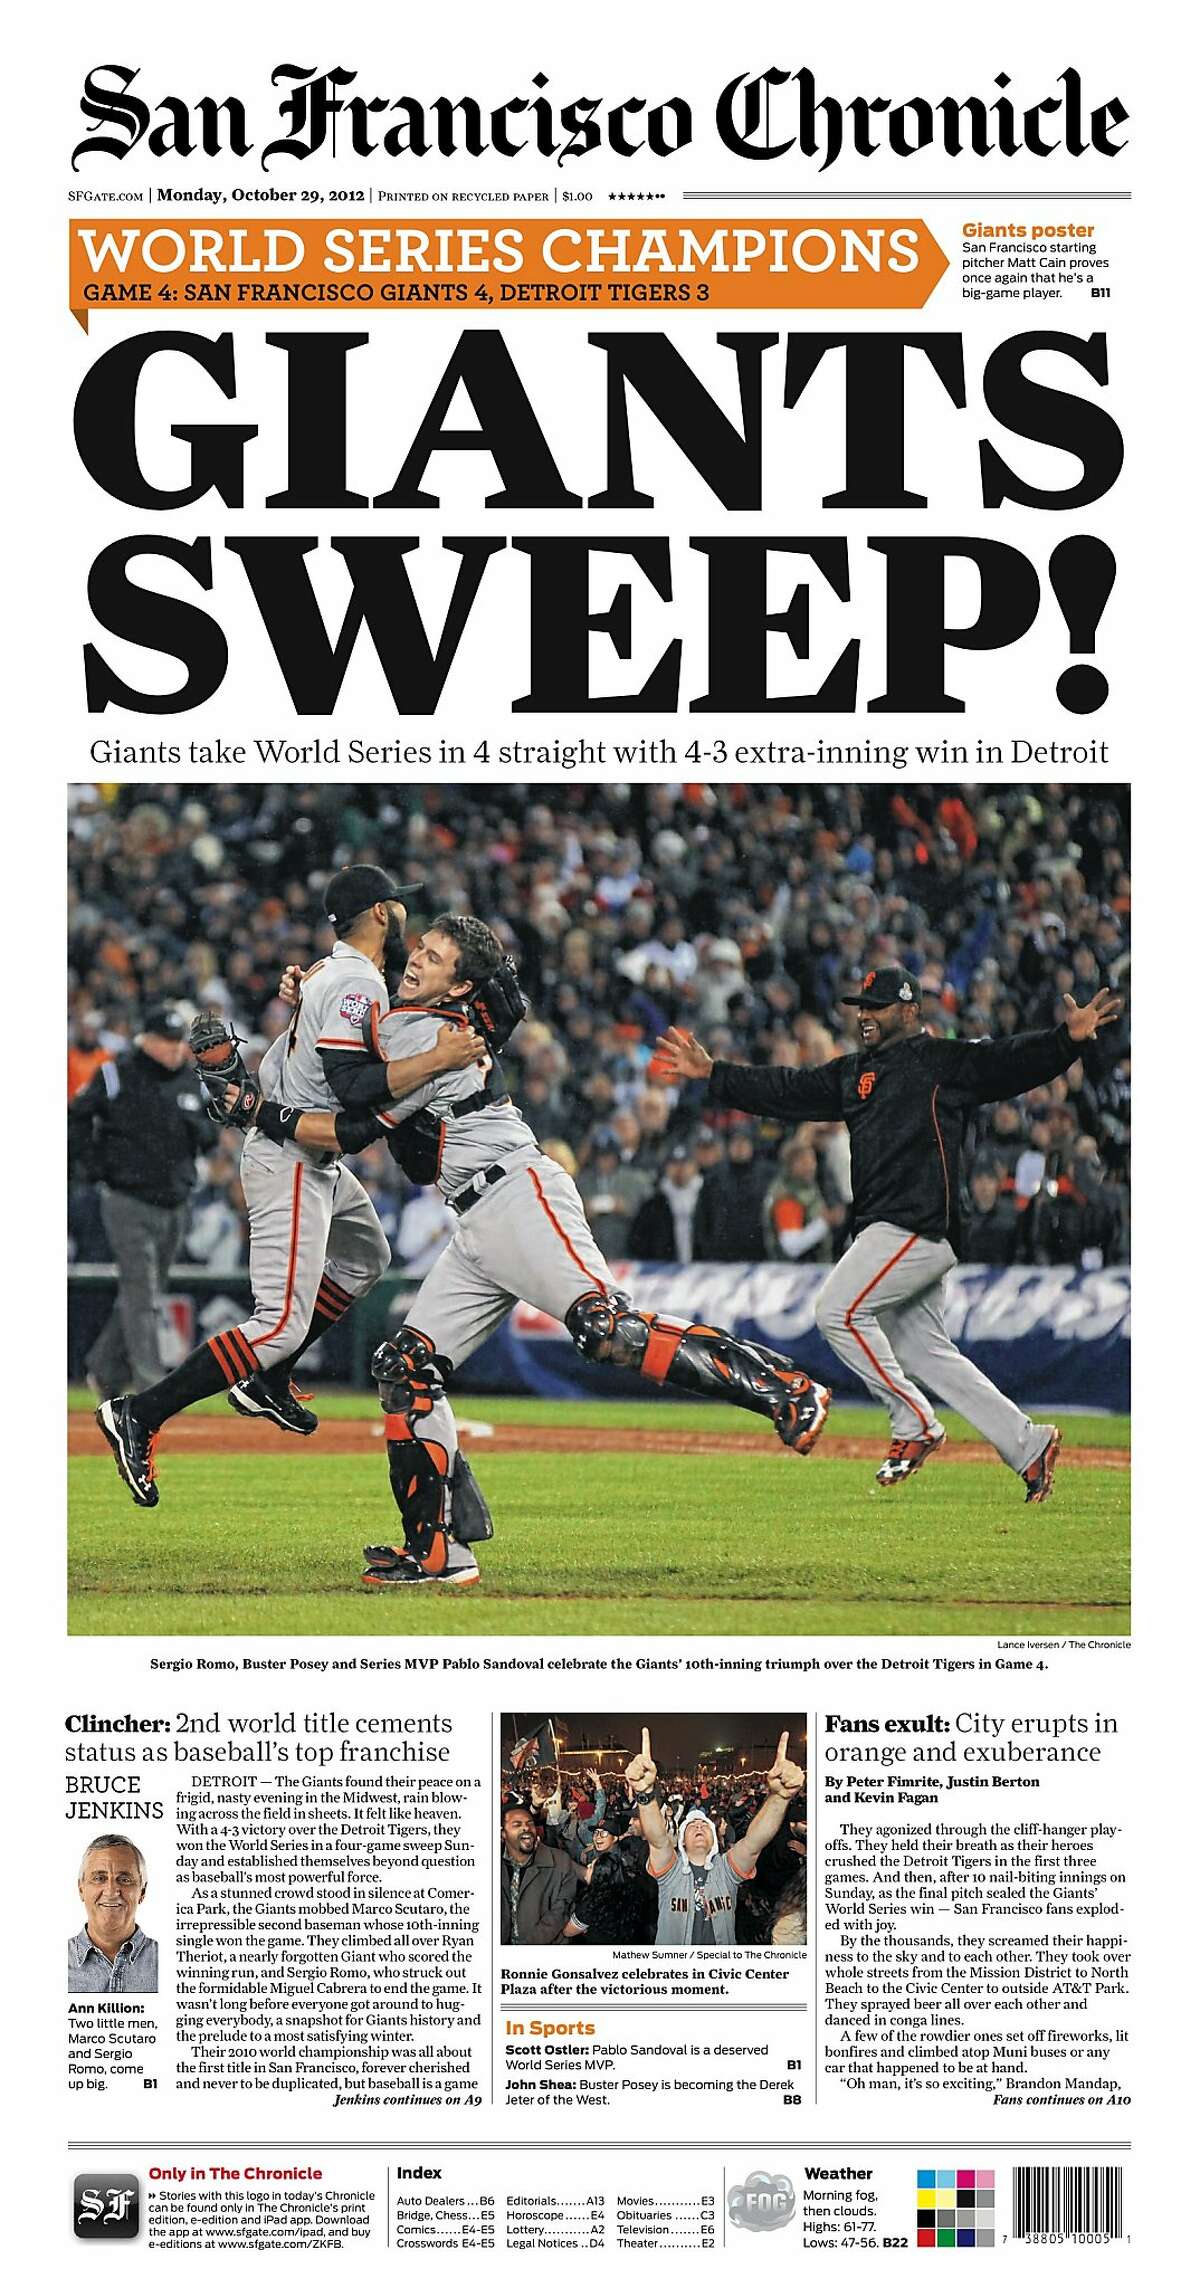 Chronicle Covers: The Giants' sweeping second world title in SF